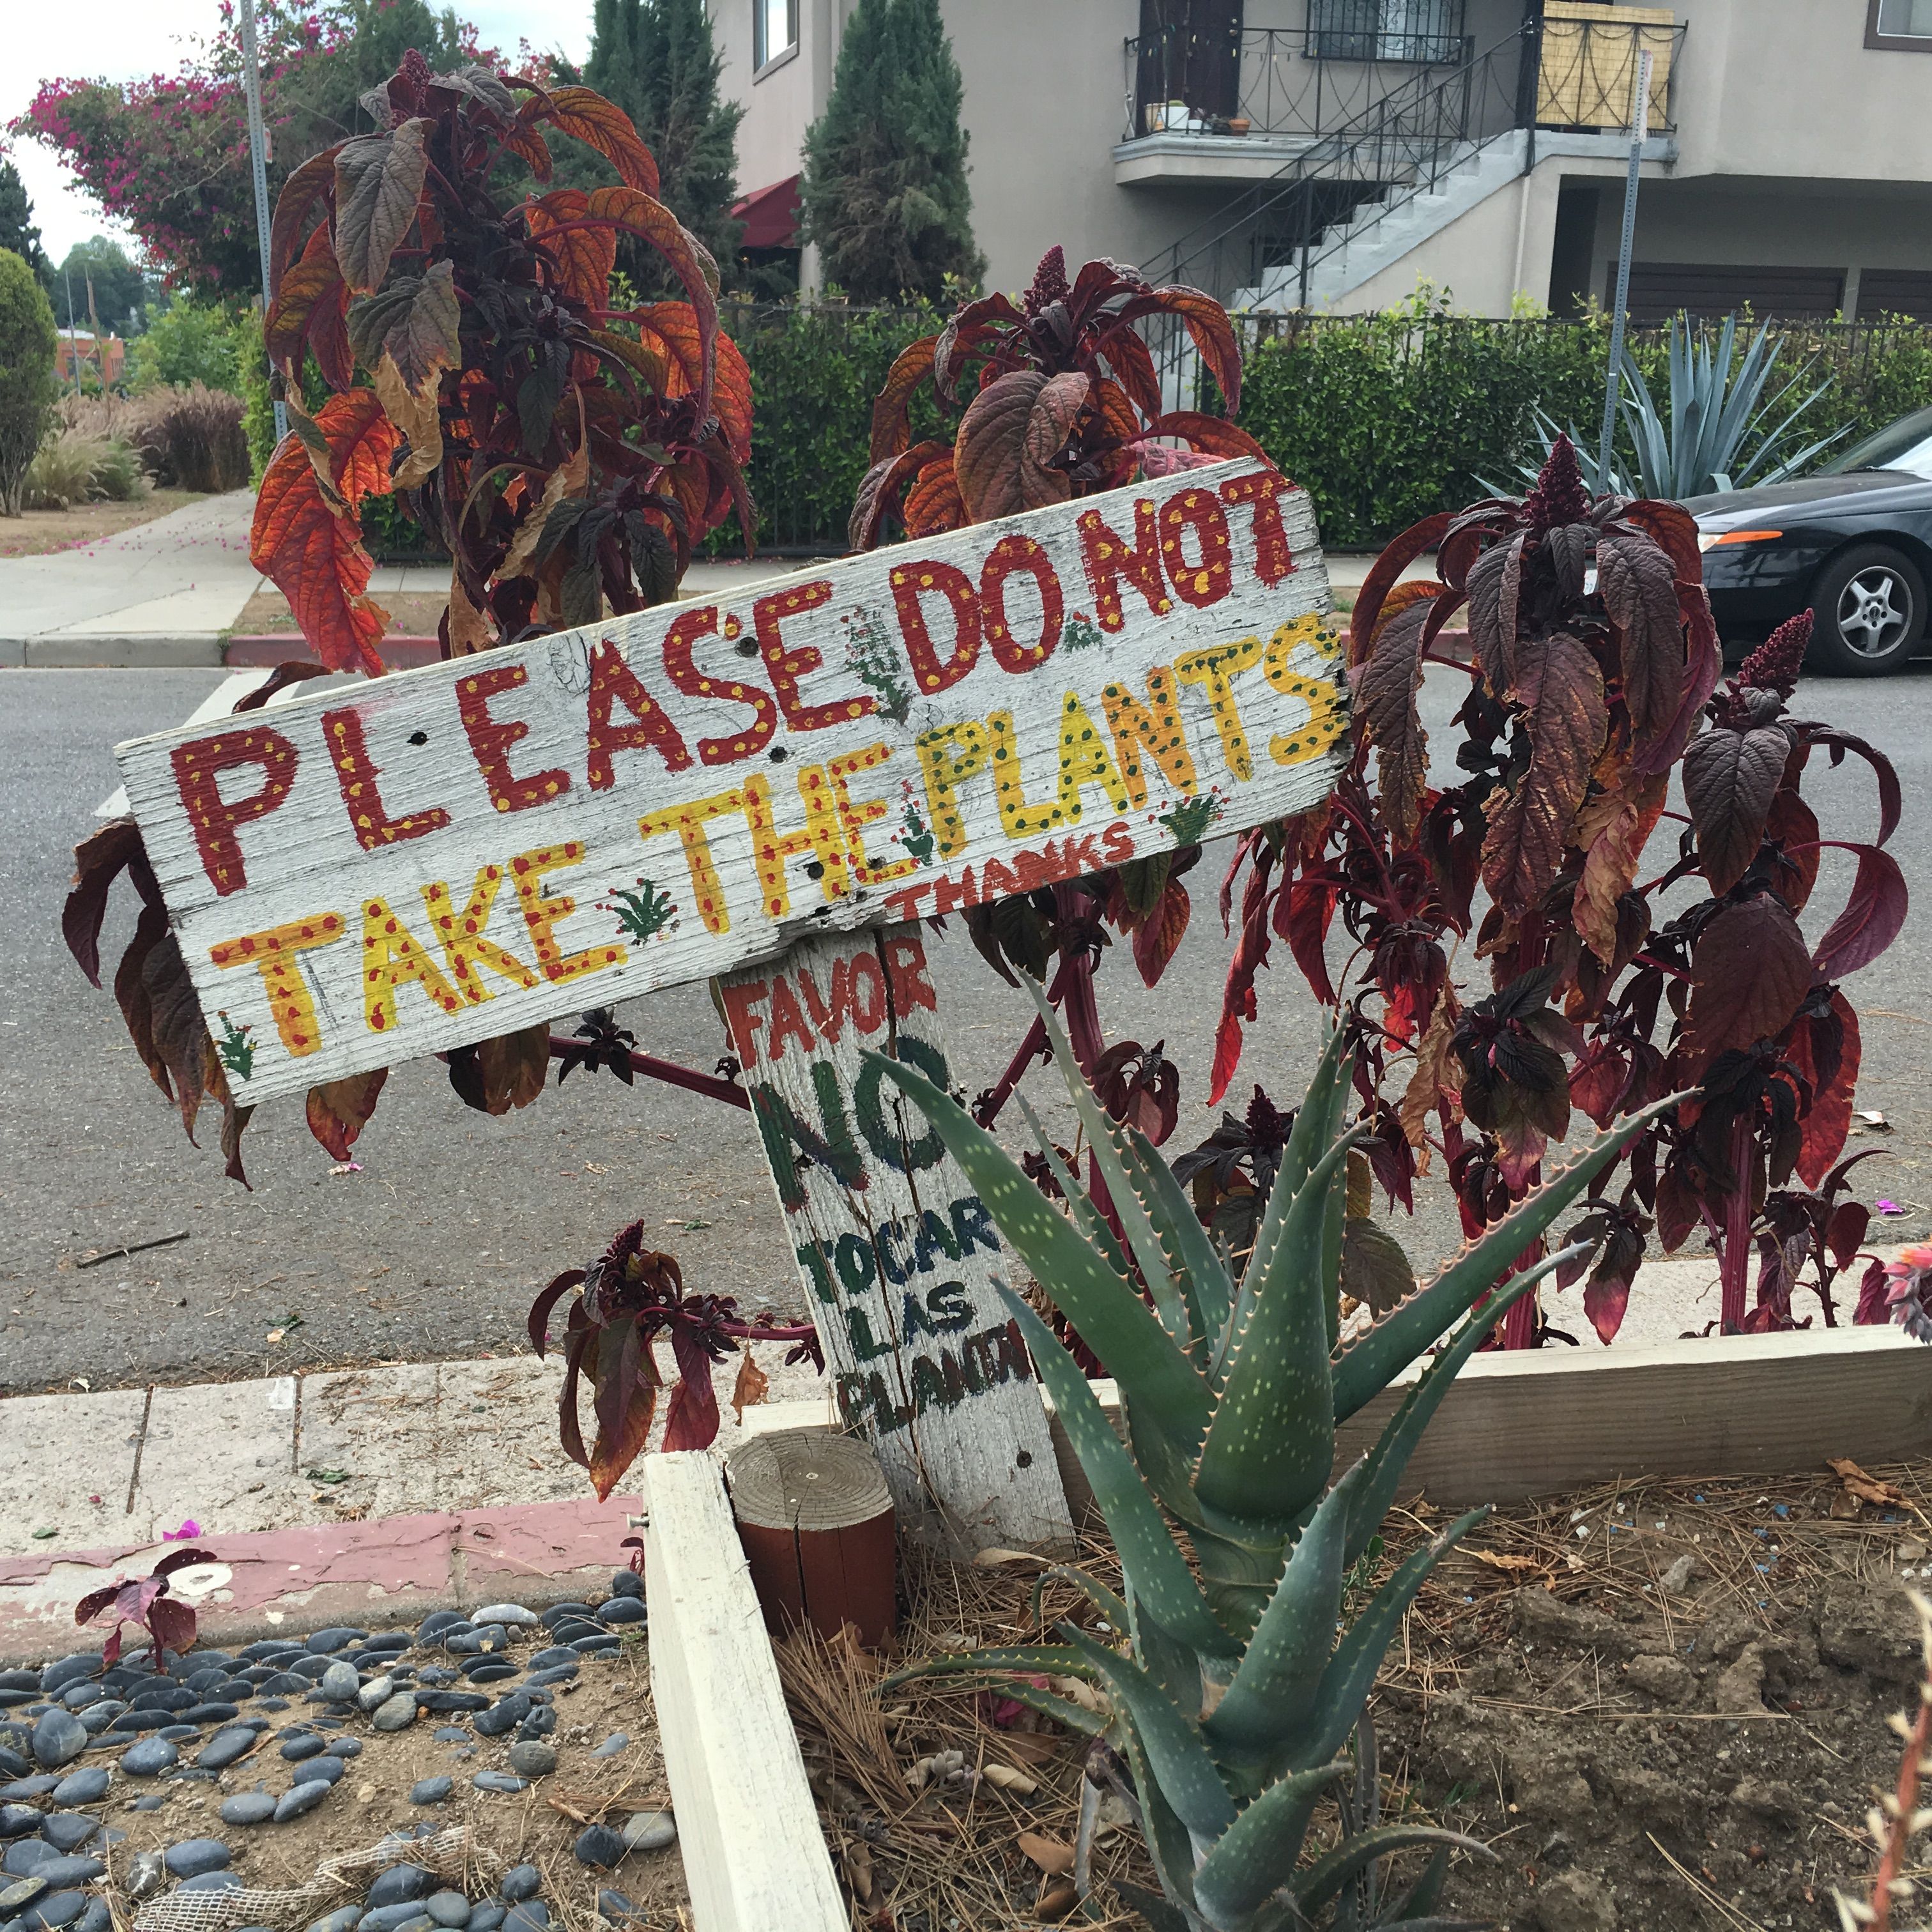 don't steal plants